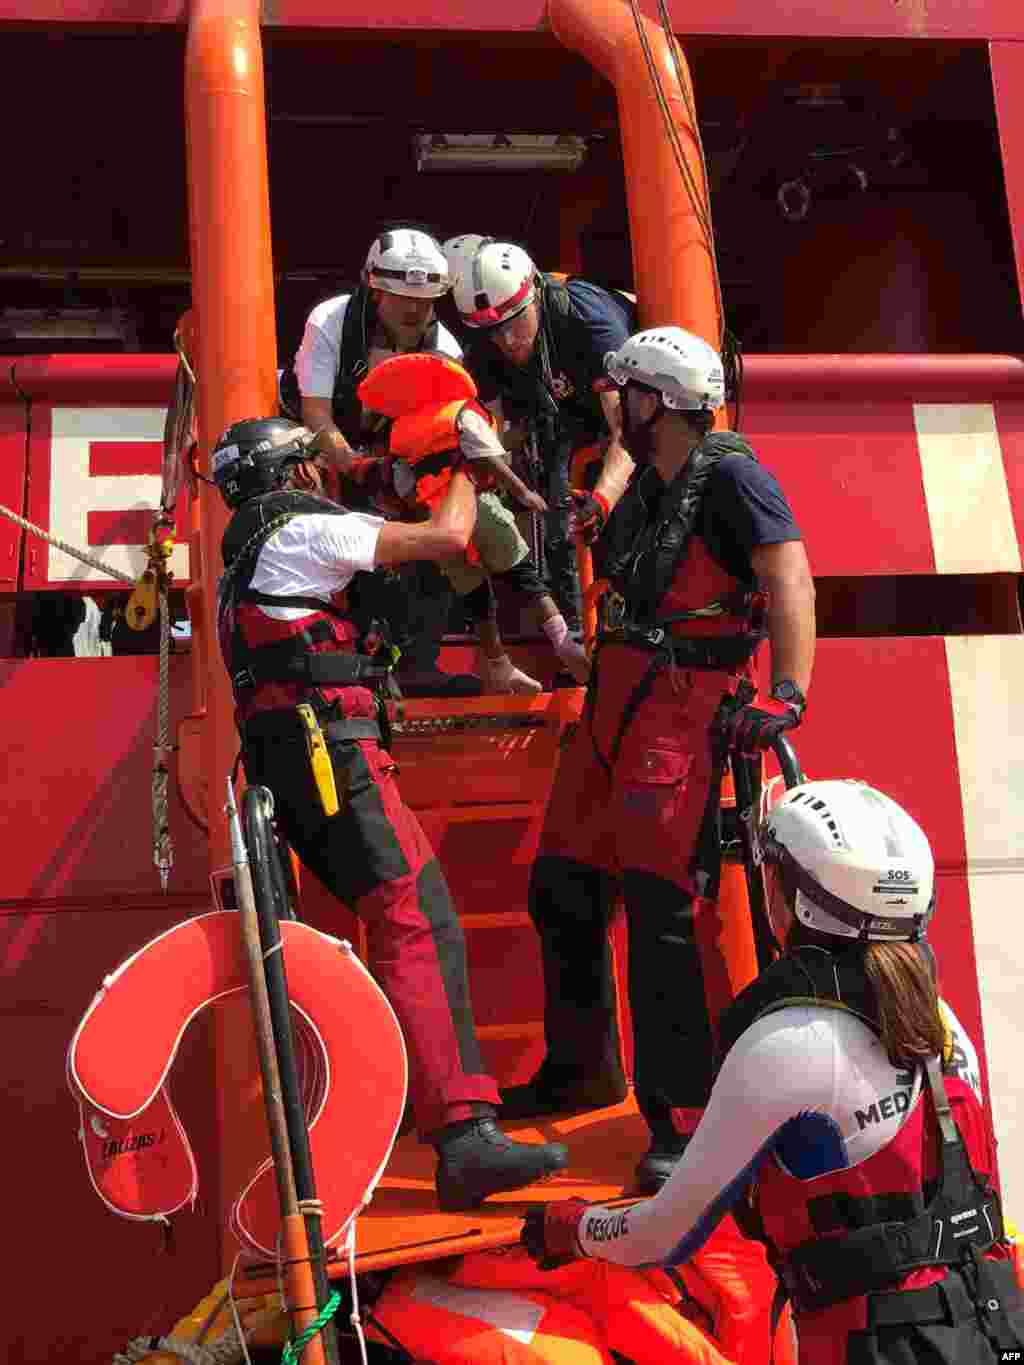 Crew members of the &#39;Ocean Viking&#39; rescue ship, operated by French NGOs SOS Mediterranee and Medecins sans Frontieres (MSF), help a child climb on board from an inflatable rescue dinghy, during their first rescue operation in the Mediterranean Sea.